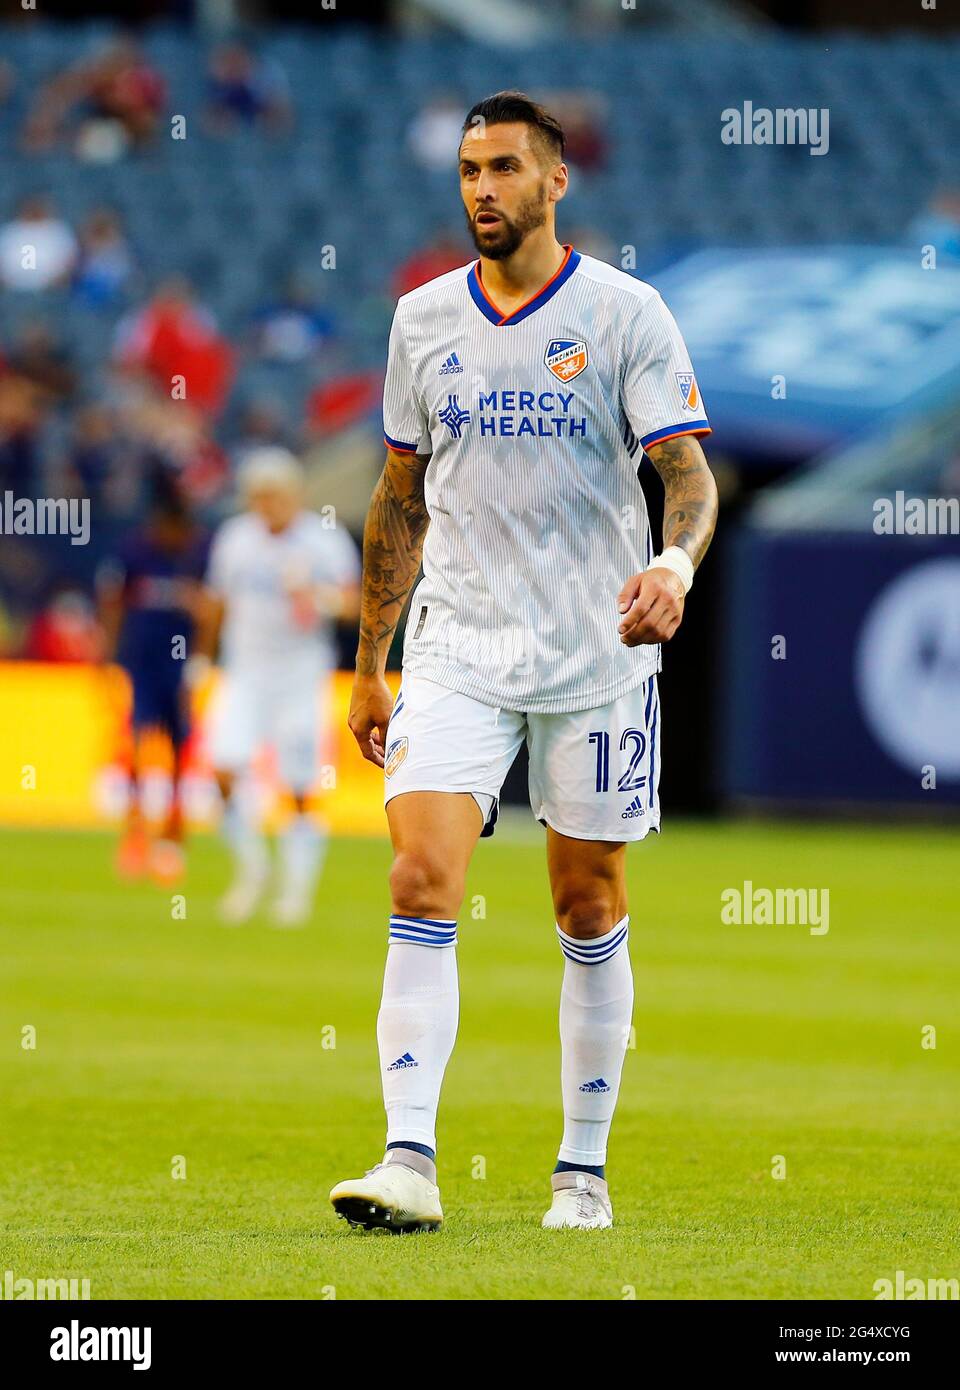 Chicago, USA. 23rd June, 2021. Major League Soccer (MLS) FC Cincinnati's Geoff Cameron walks off the pitch at the half against the Chicago Fire FC at Soldier Field in Chicago, IL, USA. Cincinnati won 1-0. Credit: Tony Gadomski/All Sport Imaging/Alamy Live News Stock Photo